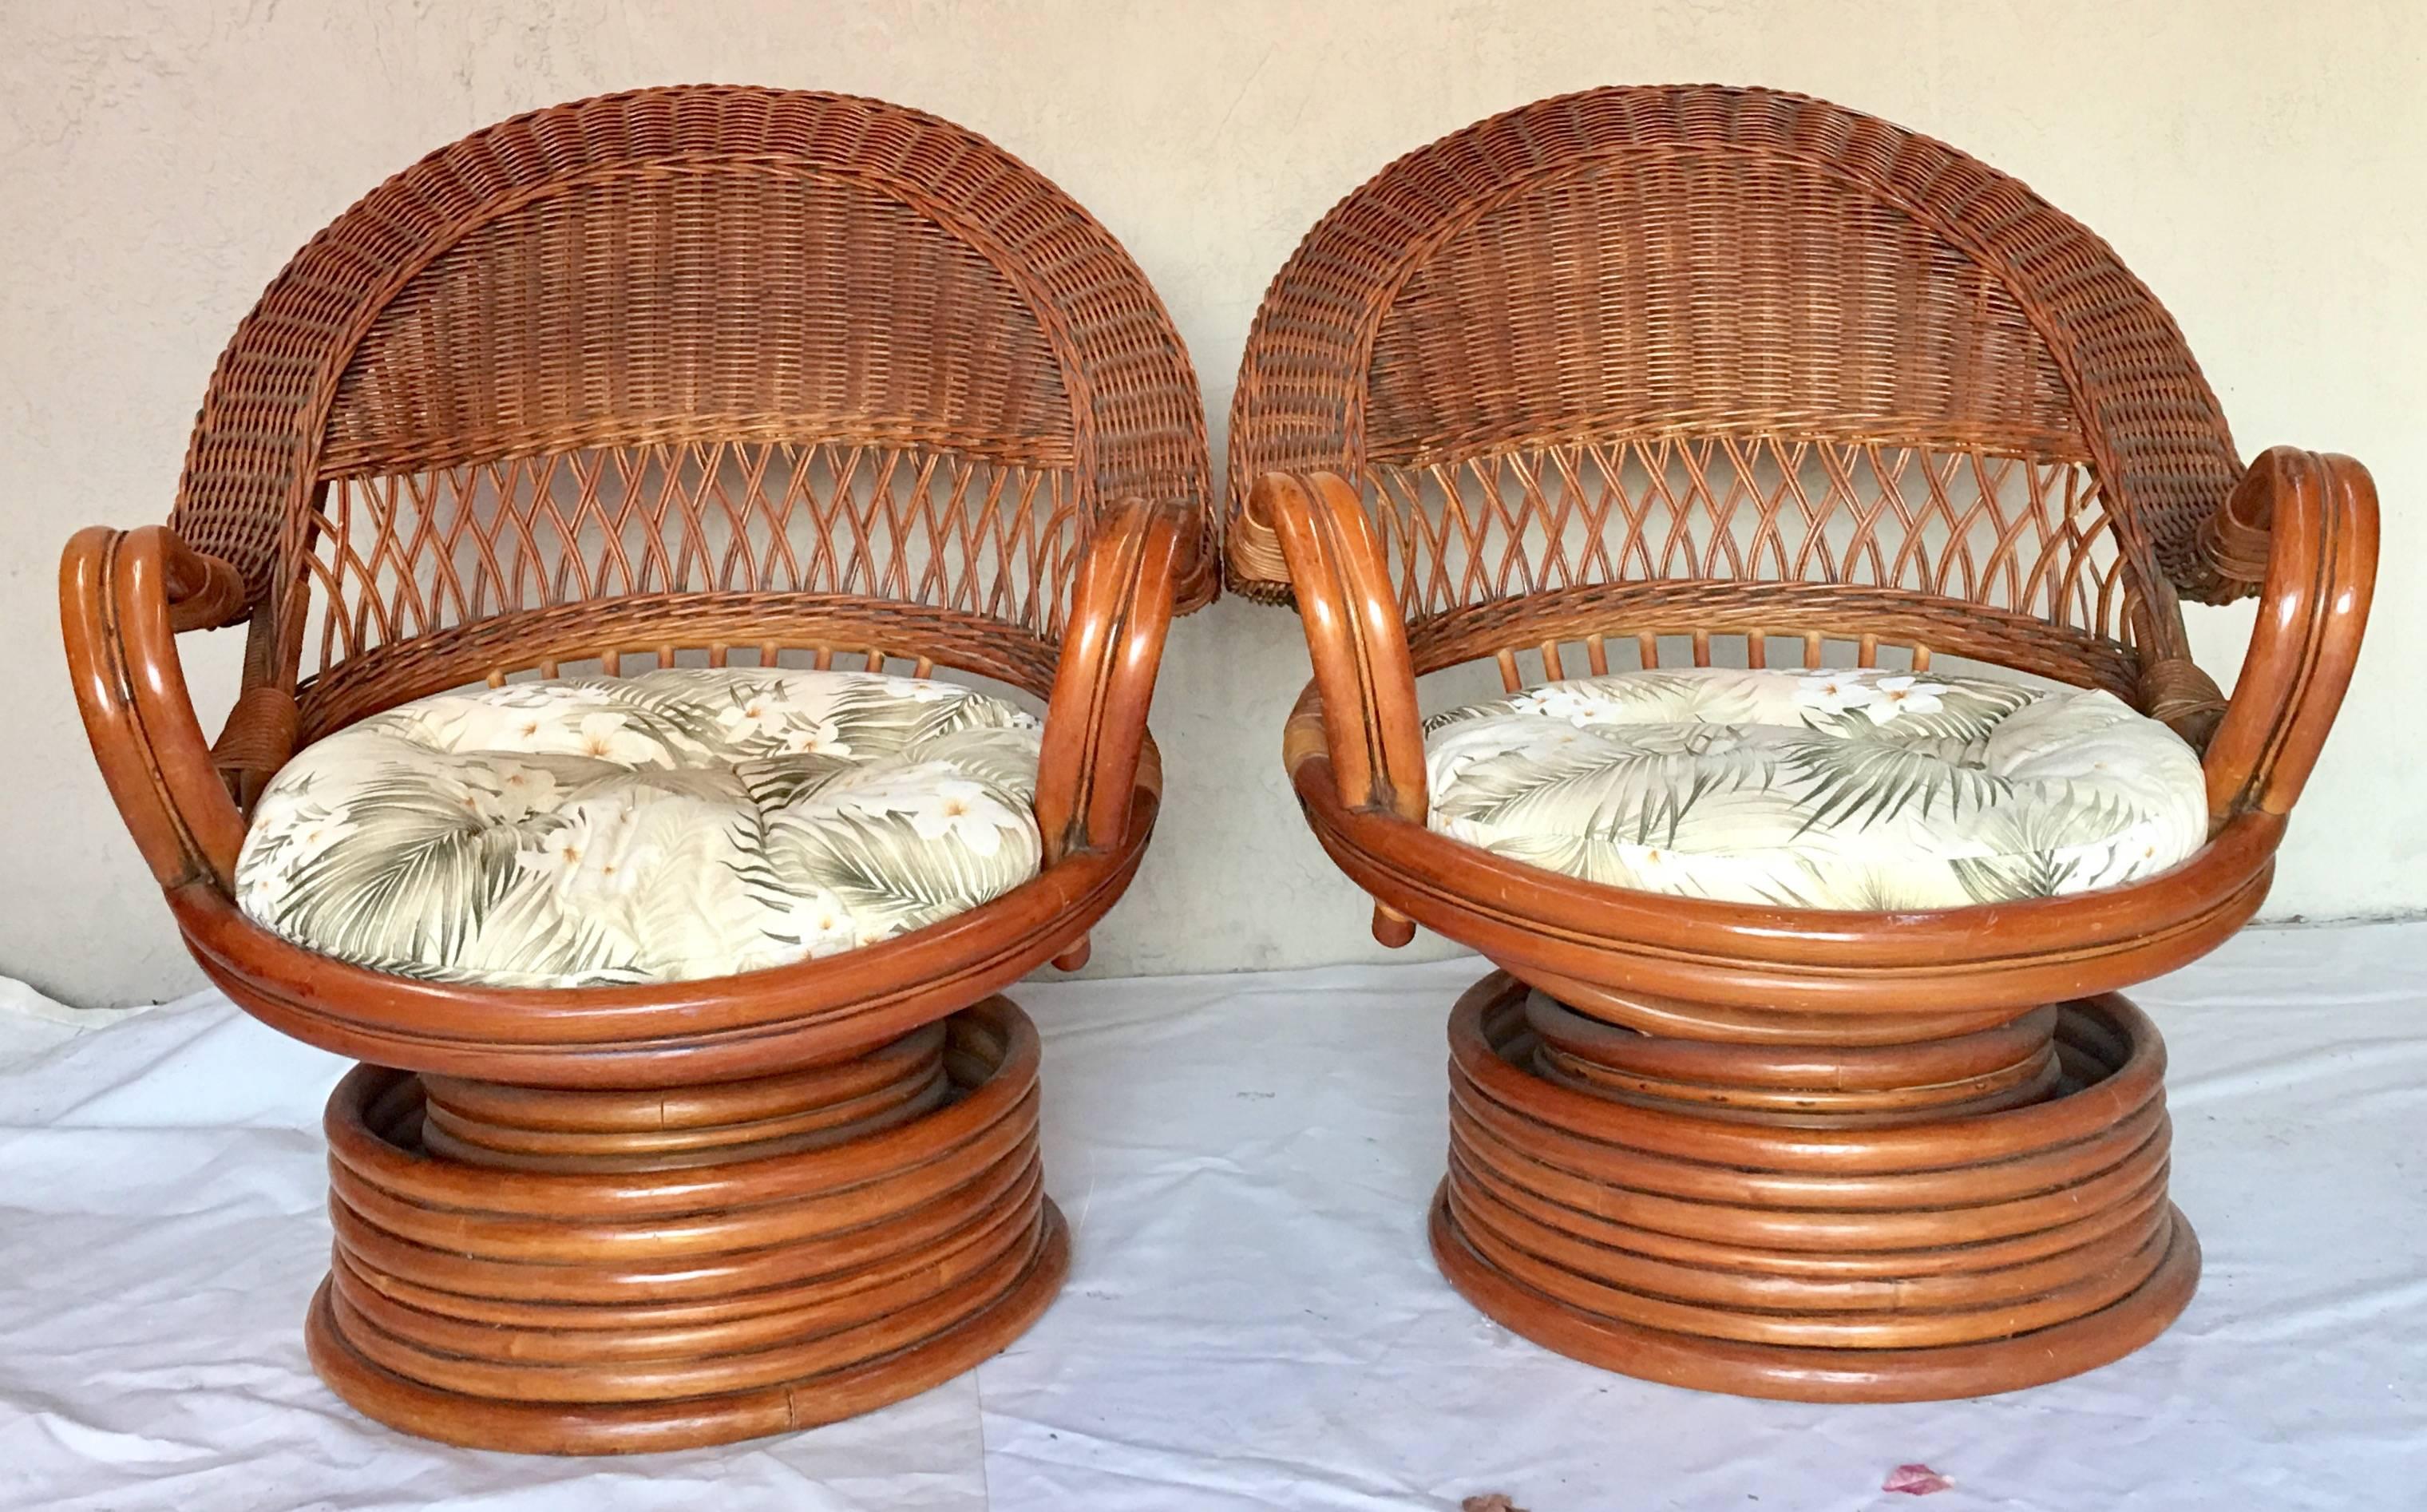 Mid-Century Paul Frankl style bent and stacked rattan and wicker high back 360 degree swivel chairs. This rare pair of rattan chairs includes vintage seat cushion with fern cotton blend indoor outdoor fabric. Cushions are button tufted on both